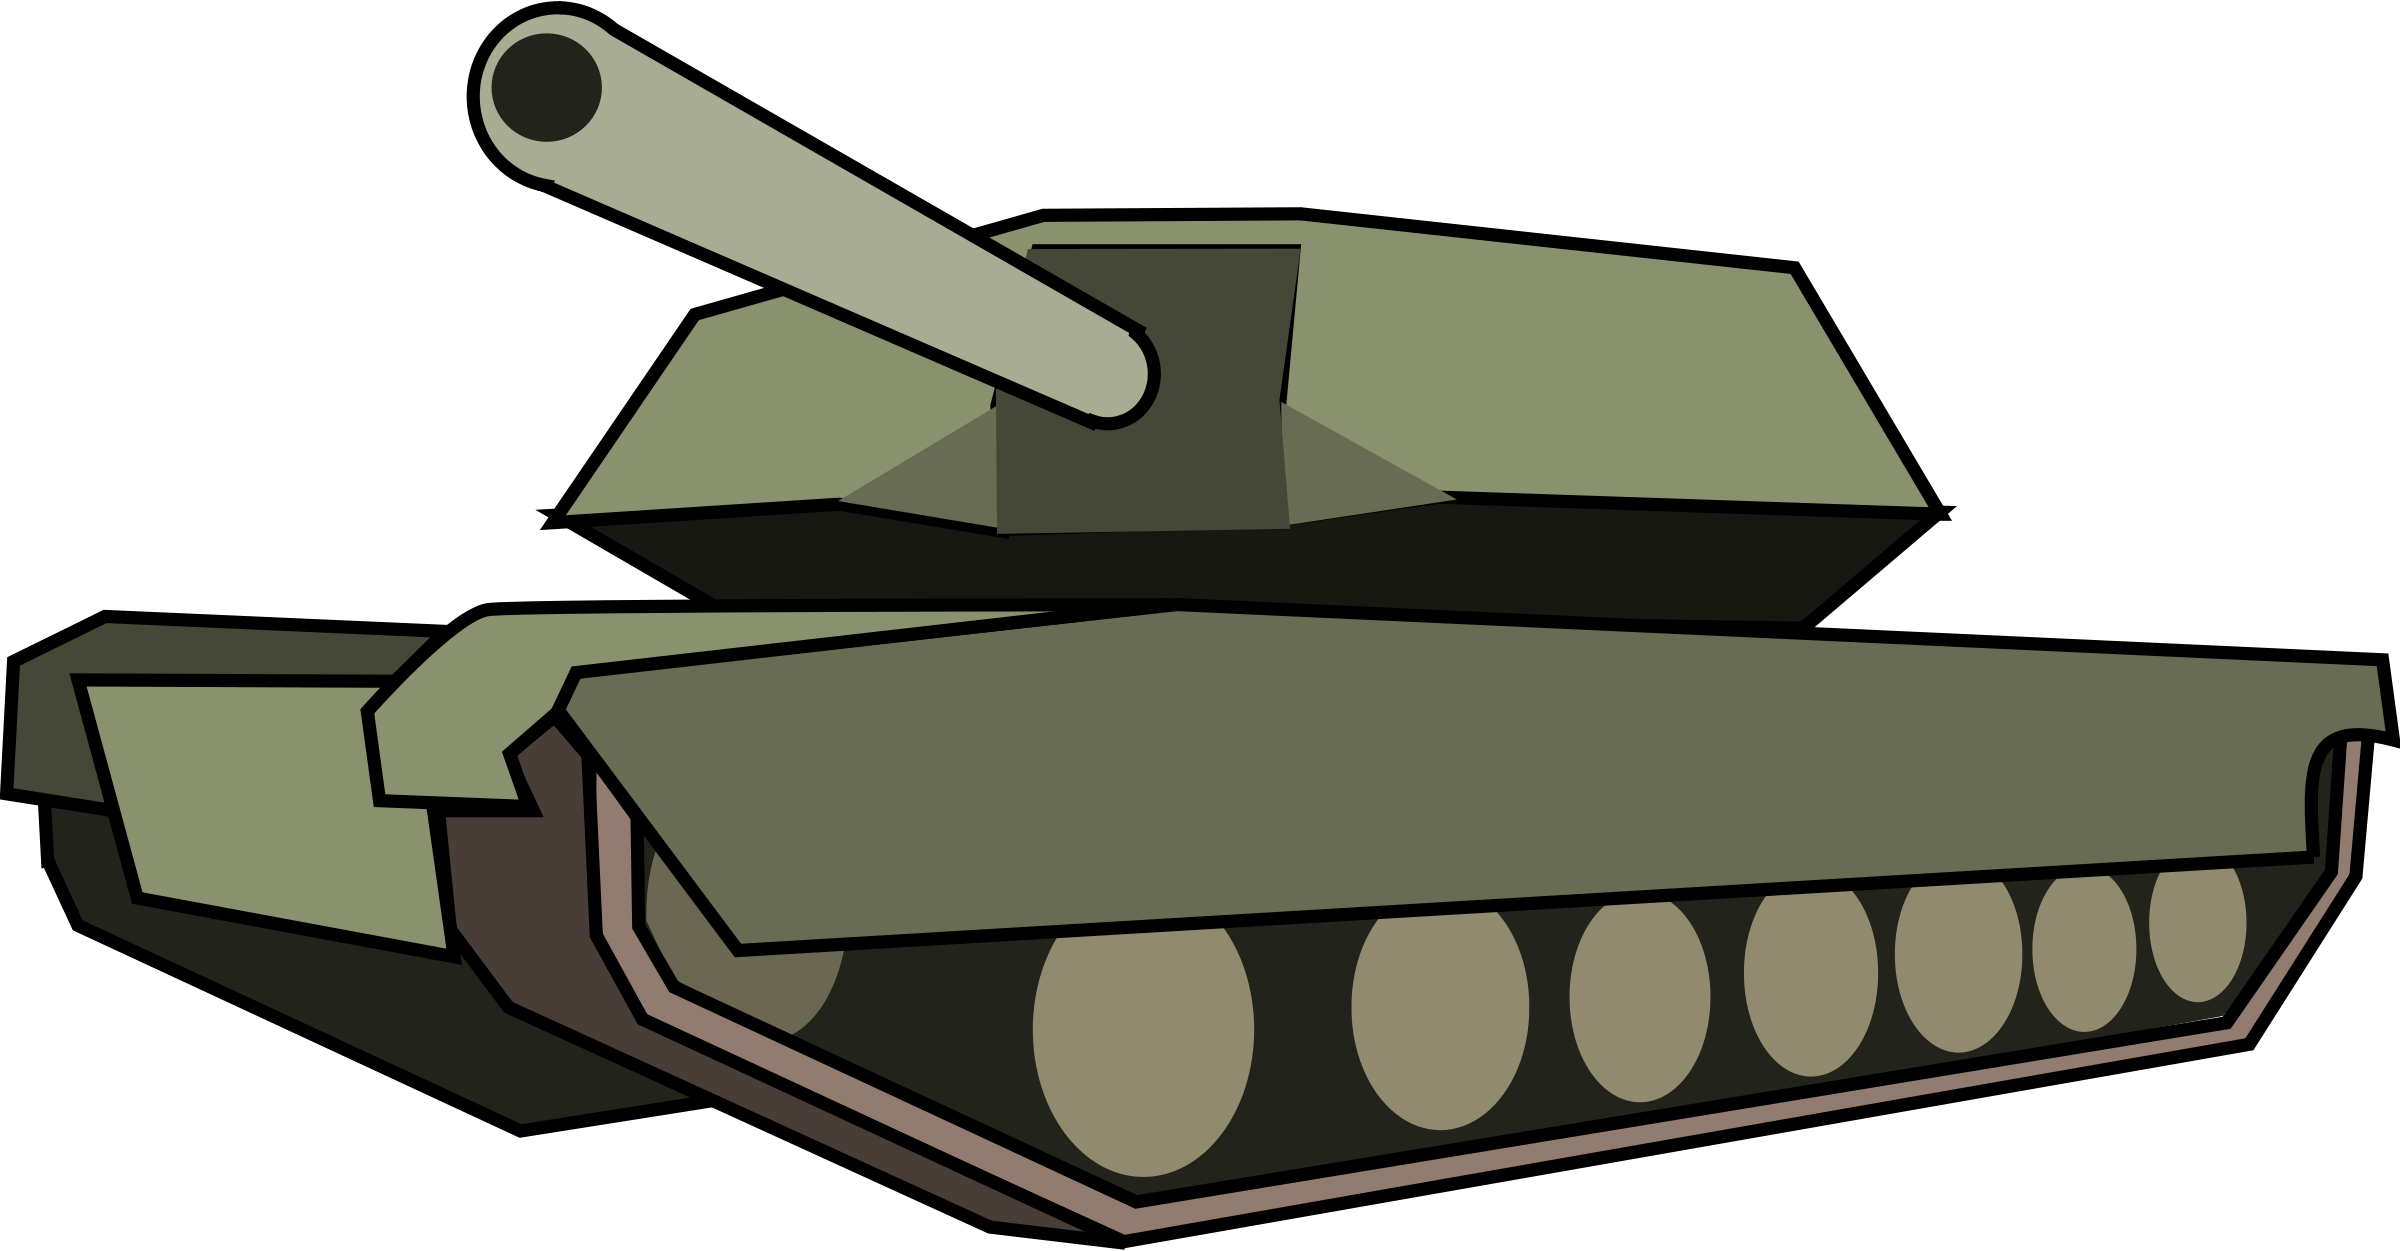 Red tank military drawing - safetynaw